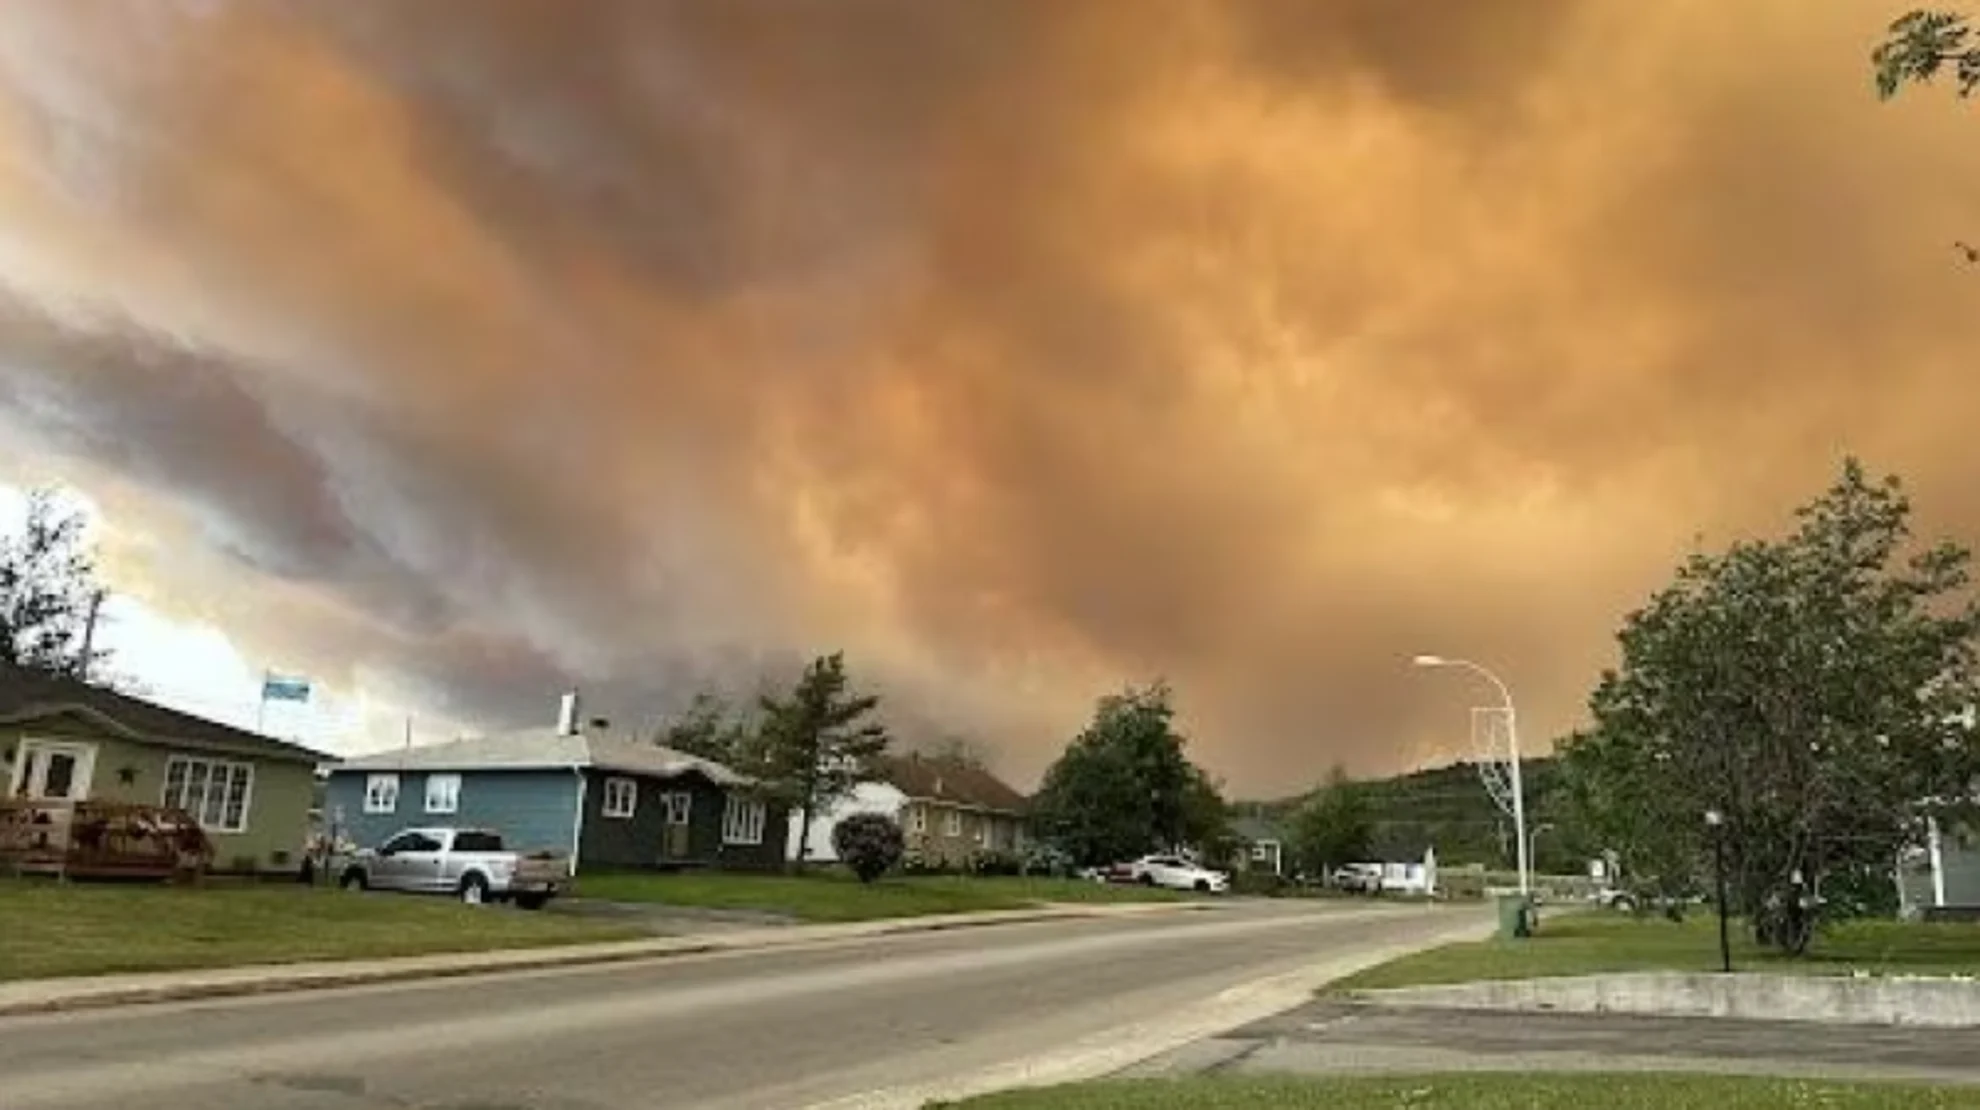 Rainfall and humidity expected to help battle fire near Labrador City